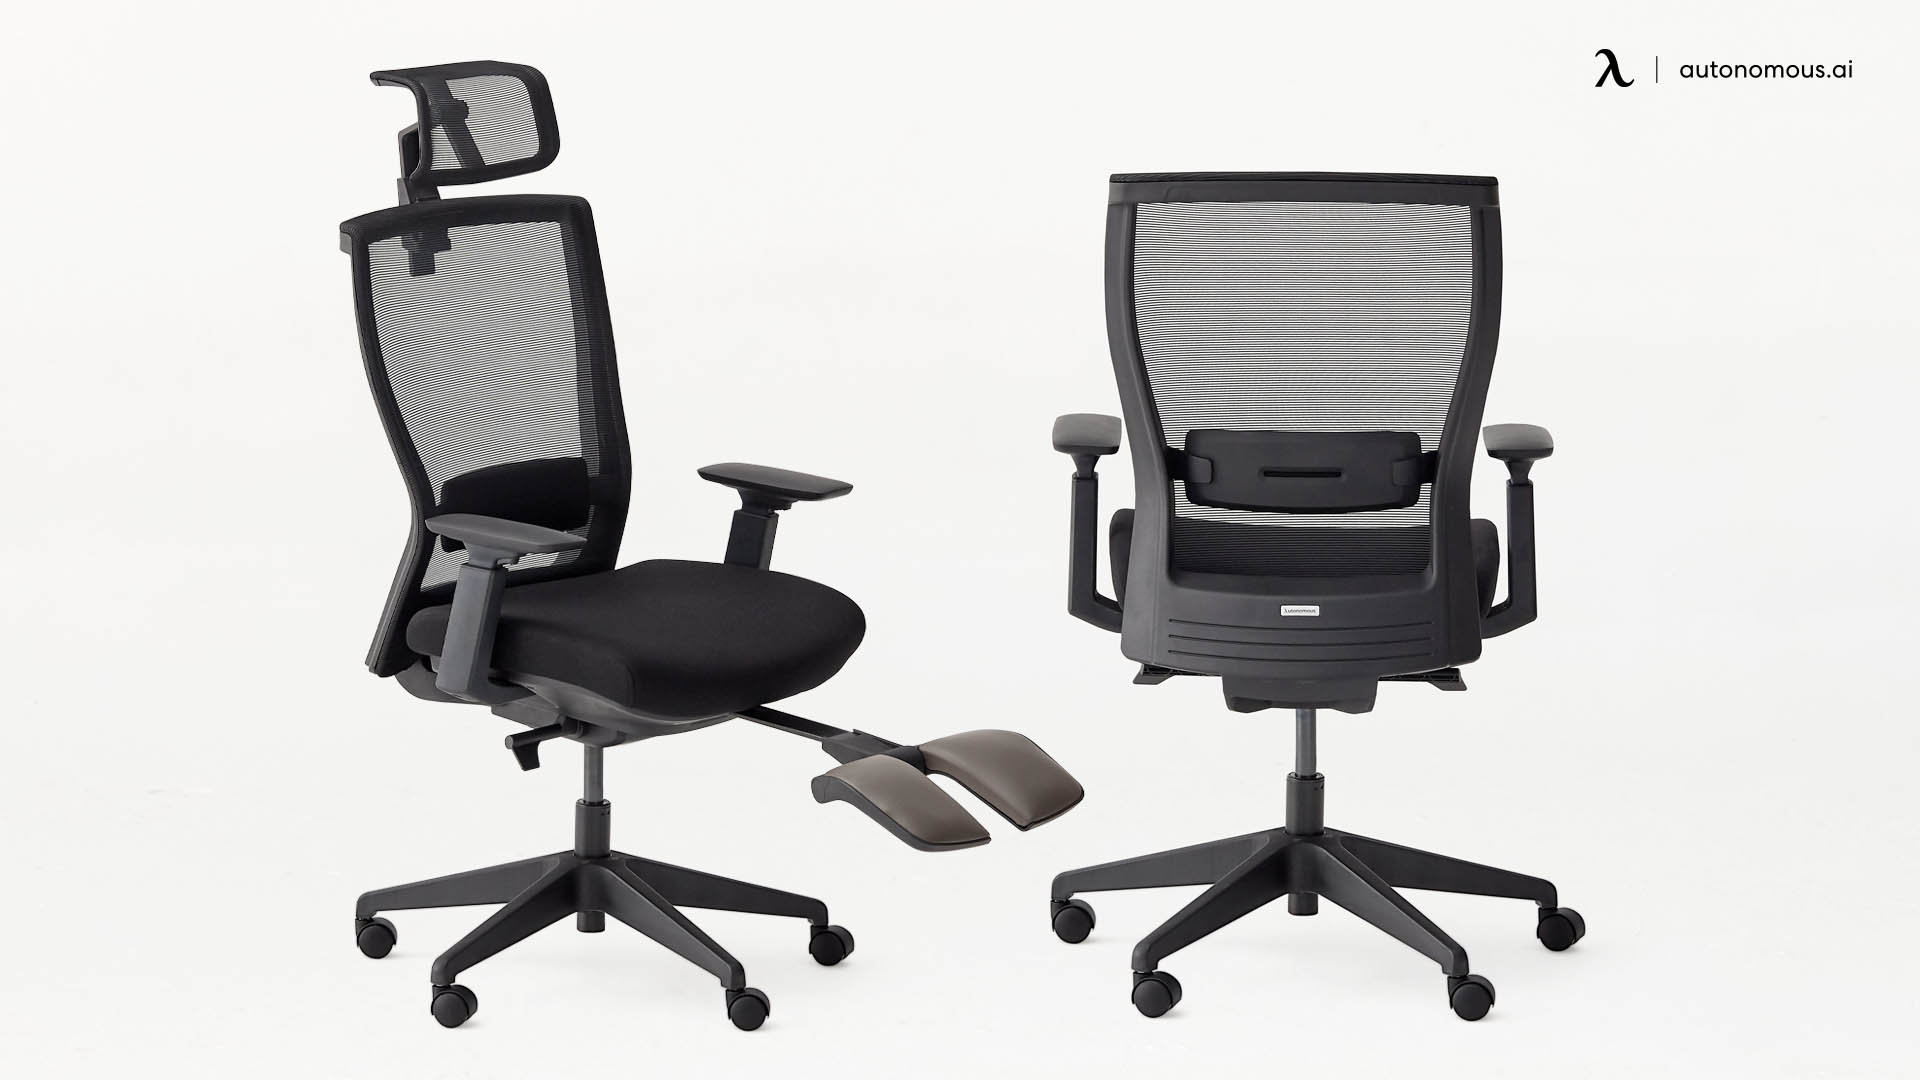 19 Best Office Chair Under 400 for 2022